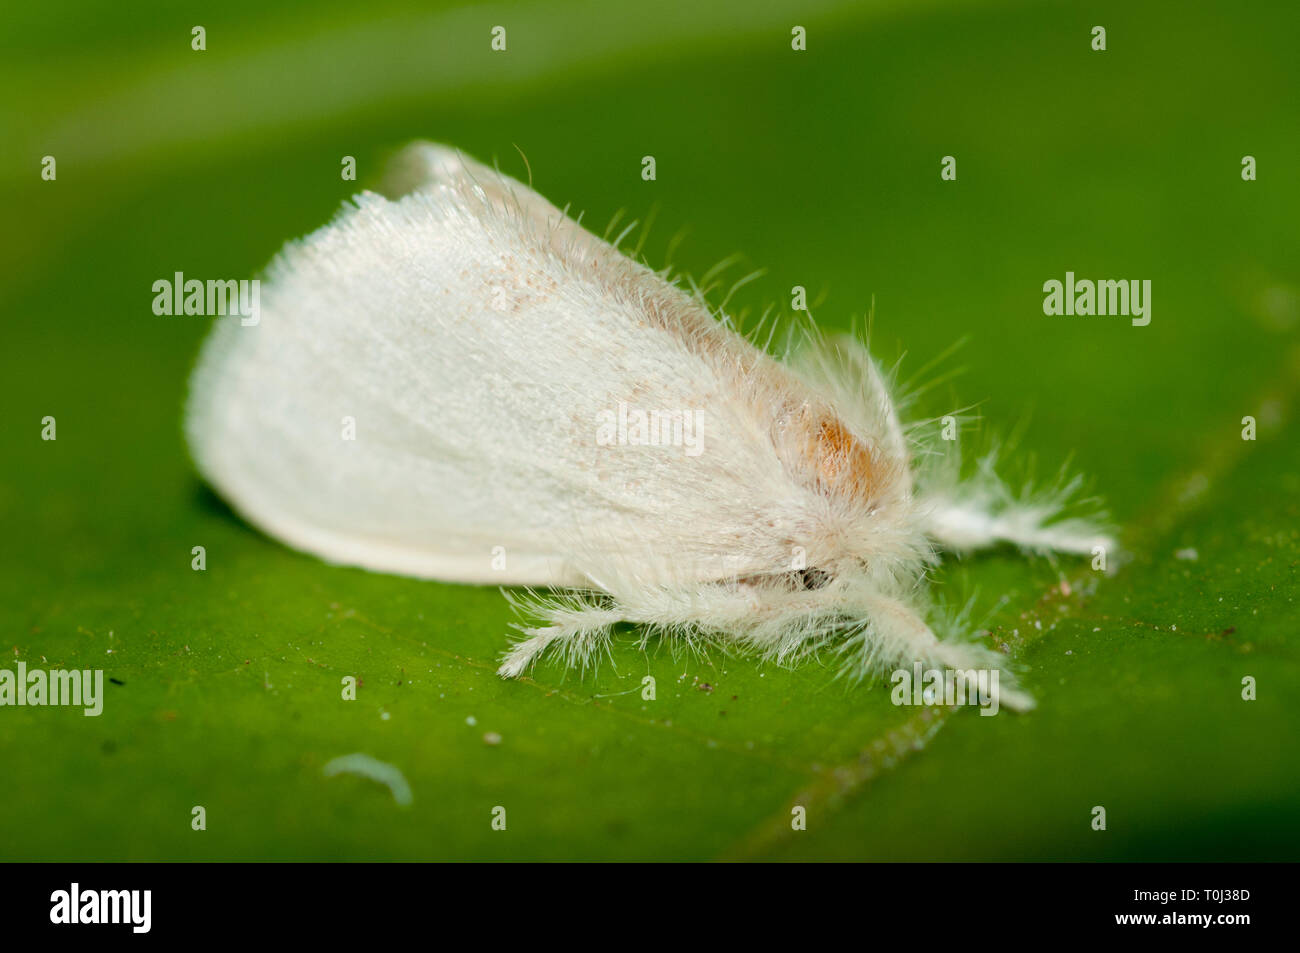 Tussock Moth, Erebidae Family with feathery hairs on leaf, Klungkung, Bali, Indonesia Stock Photo